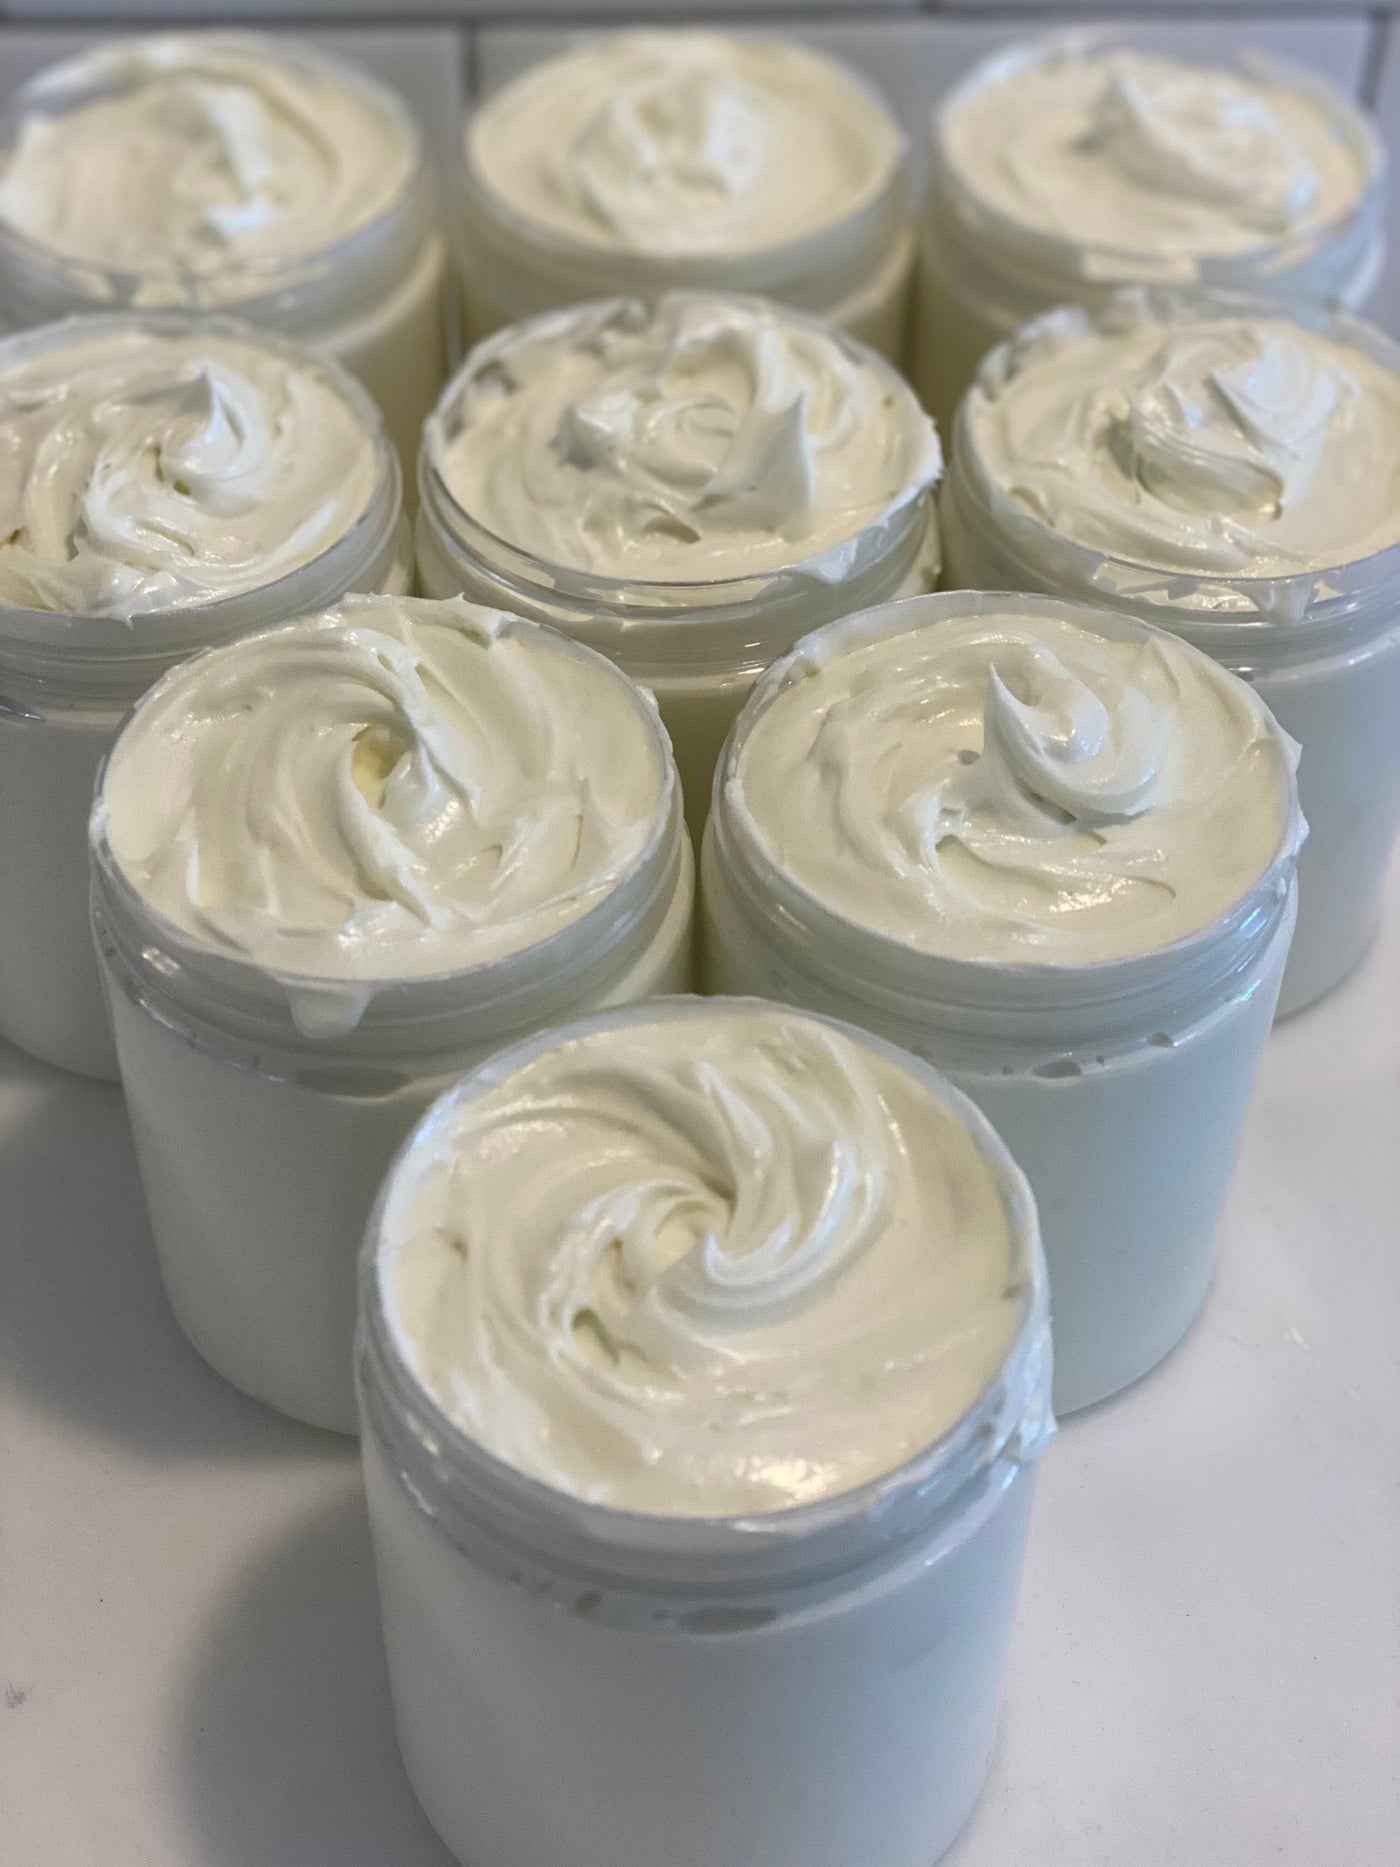 Woodstock Body Butter | Hemp and Rosehip Oil | Shea Butter | Natural Oils and Butters | Essential Oils | Handmadei